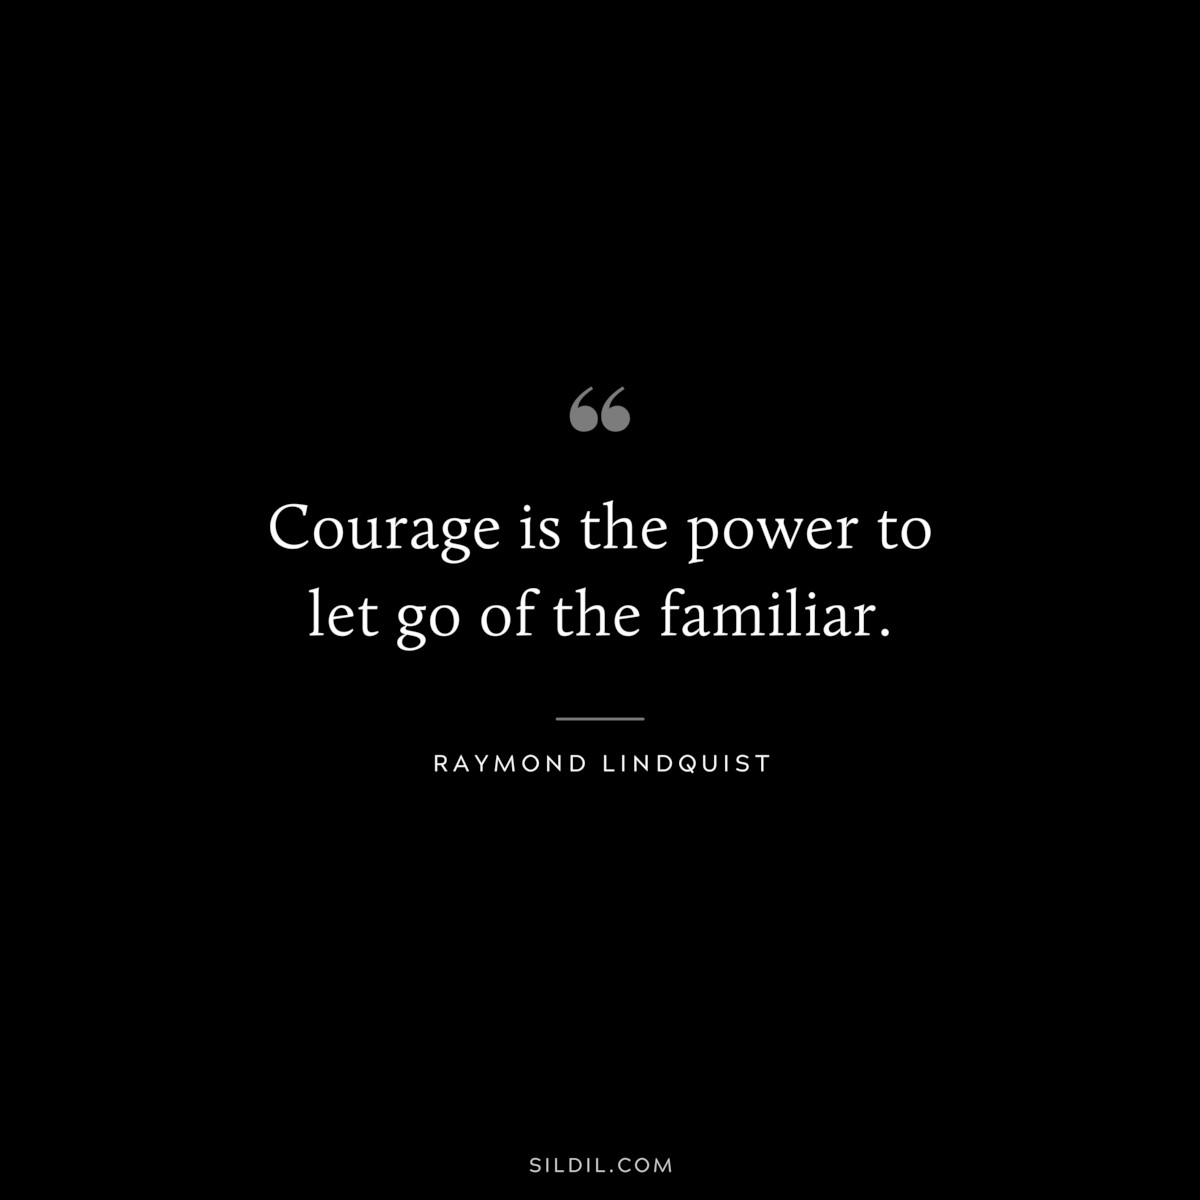 Courage is the power to let go of the familiar. ― Raymond Lindquist